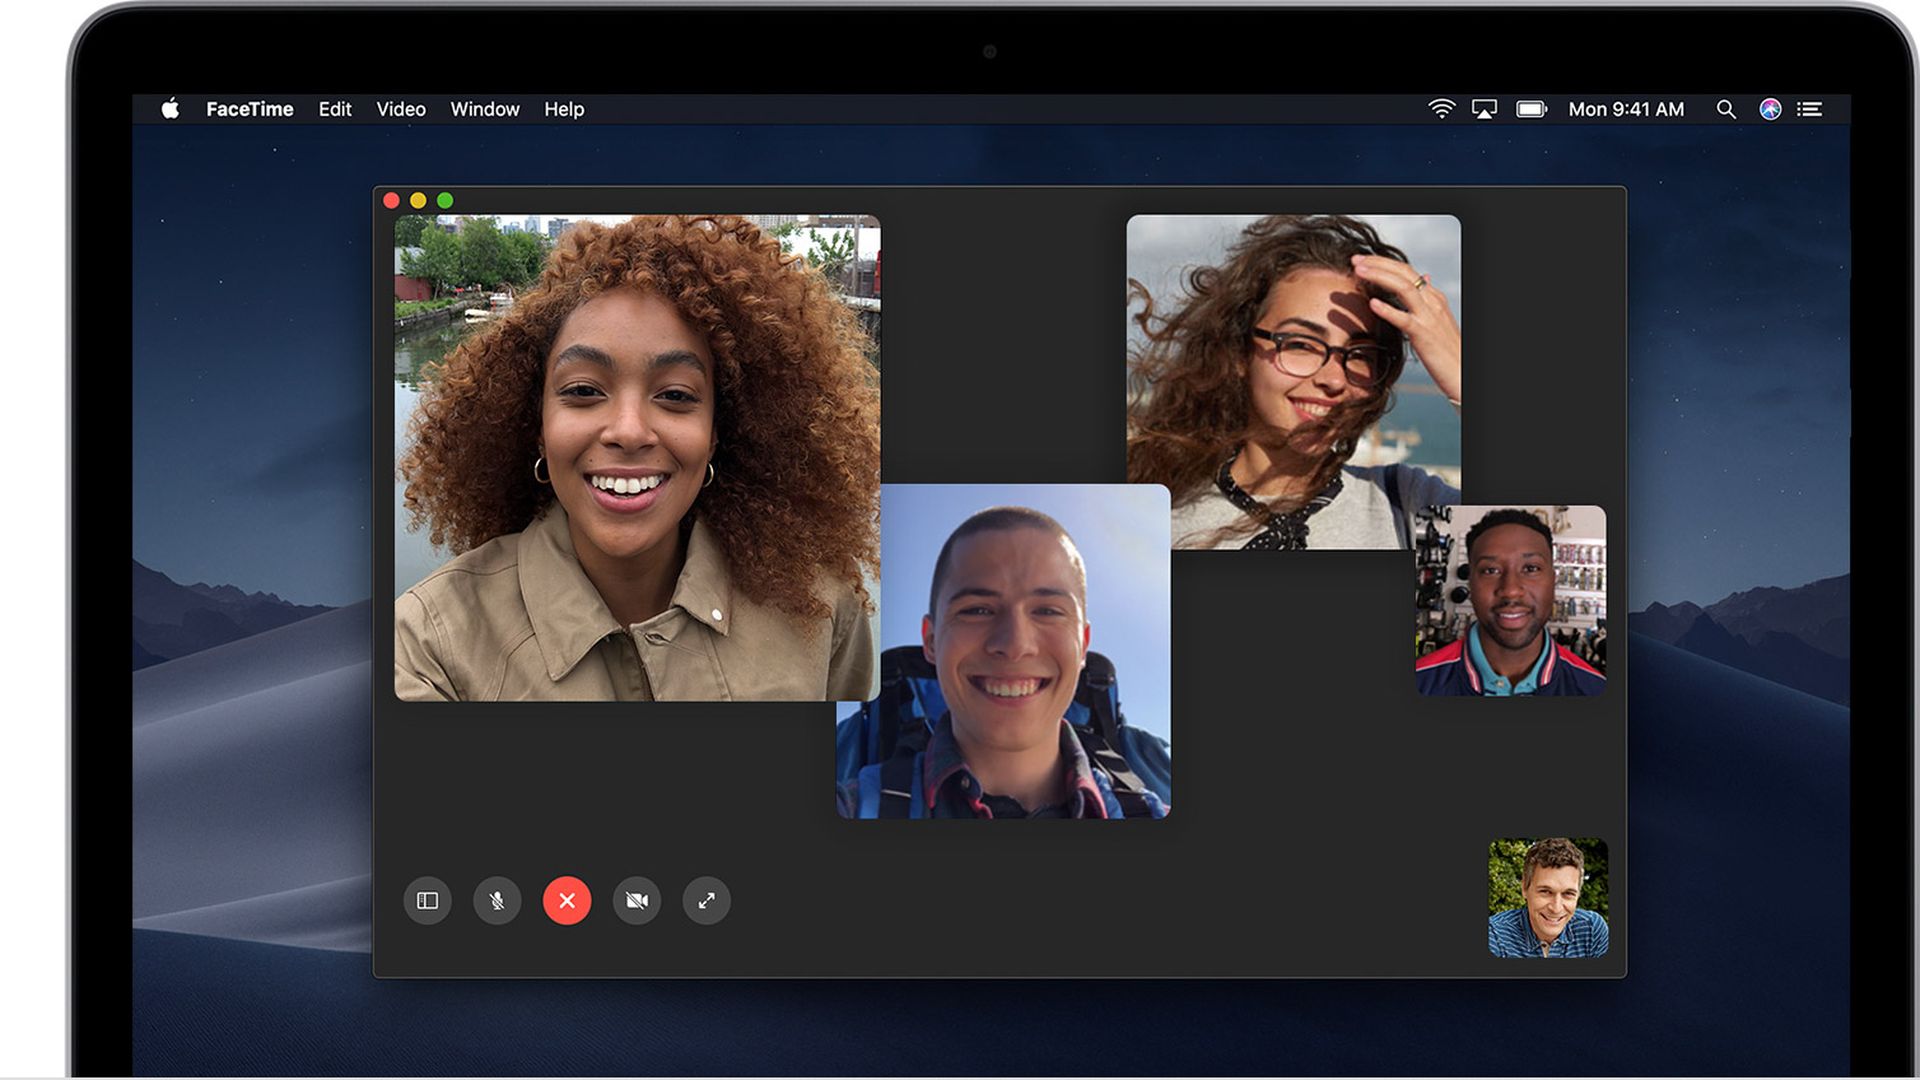 Apple's FaceTime chat app, as seen on a Mac